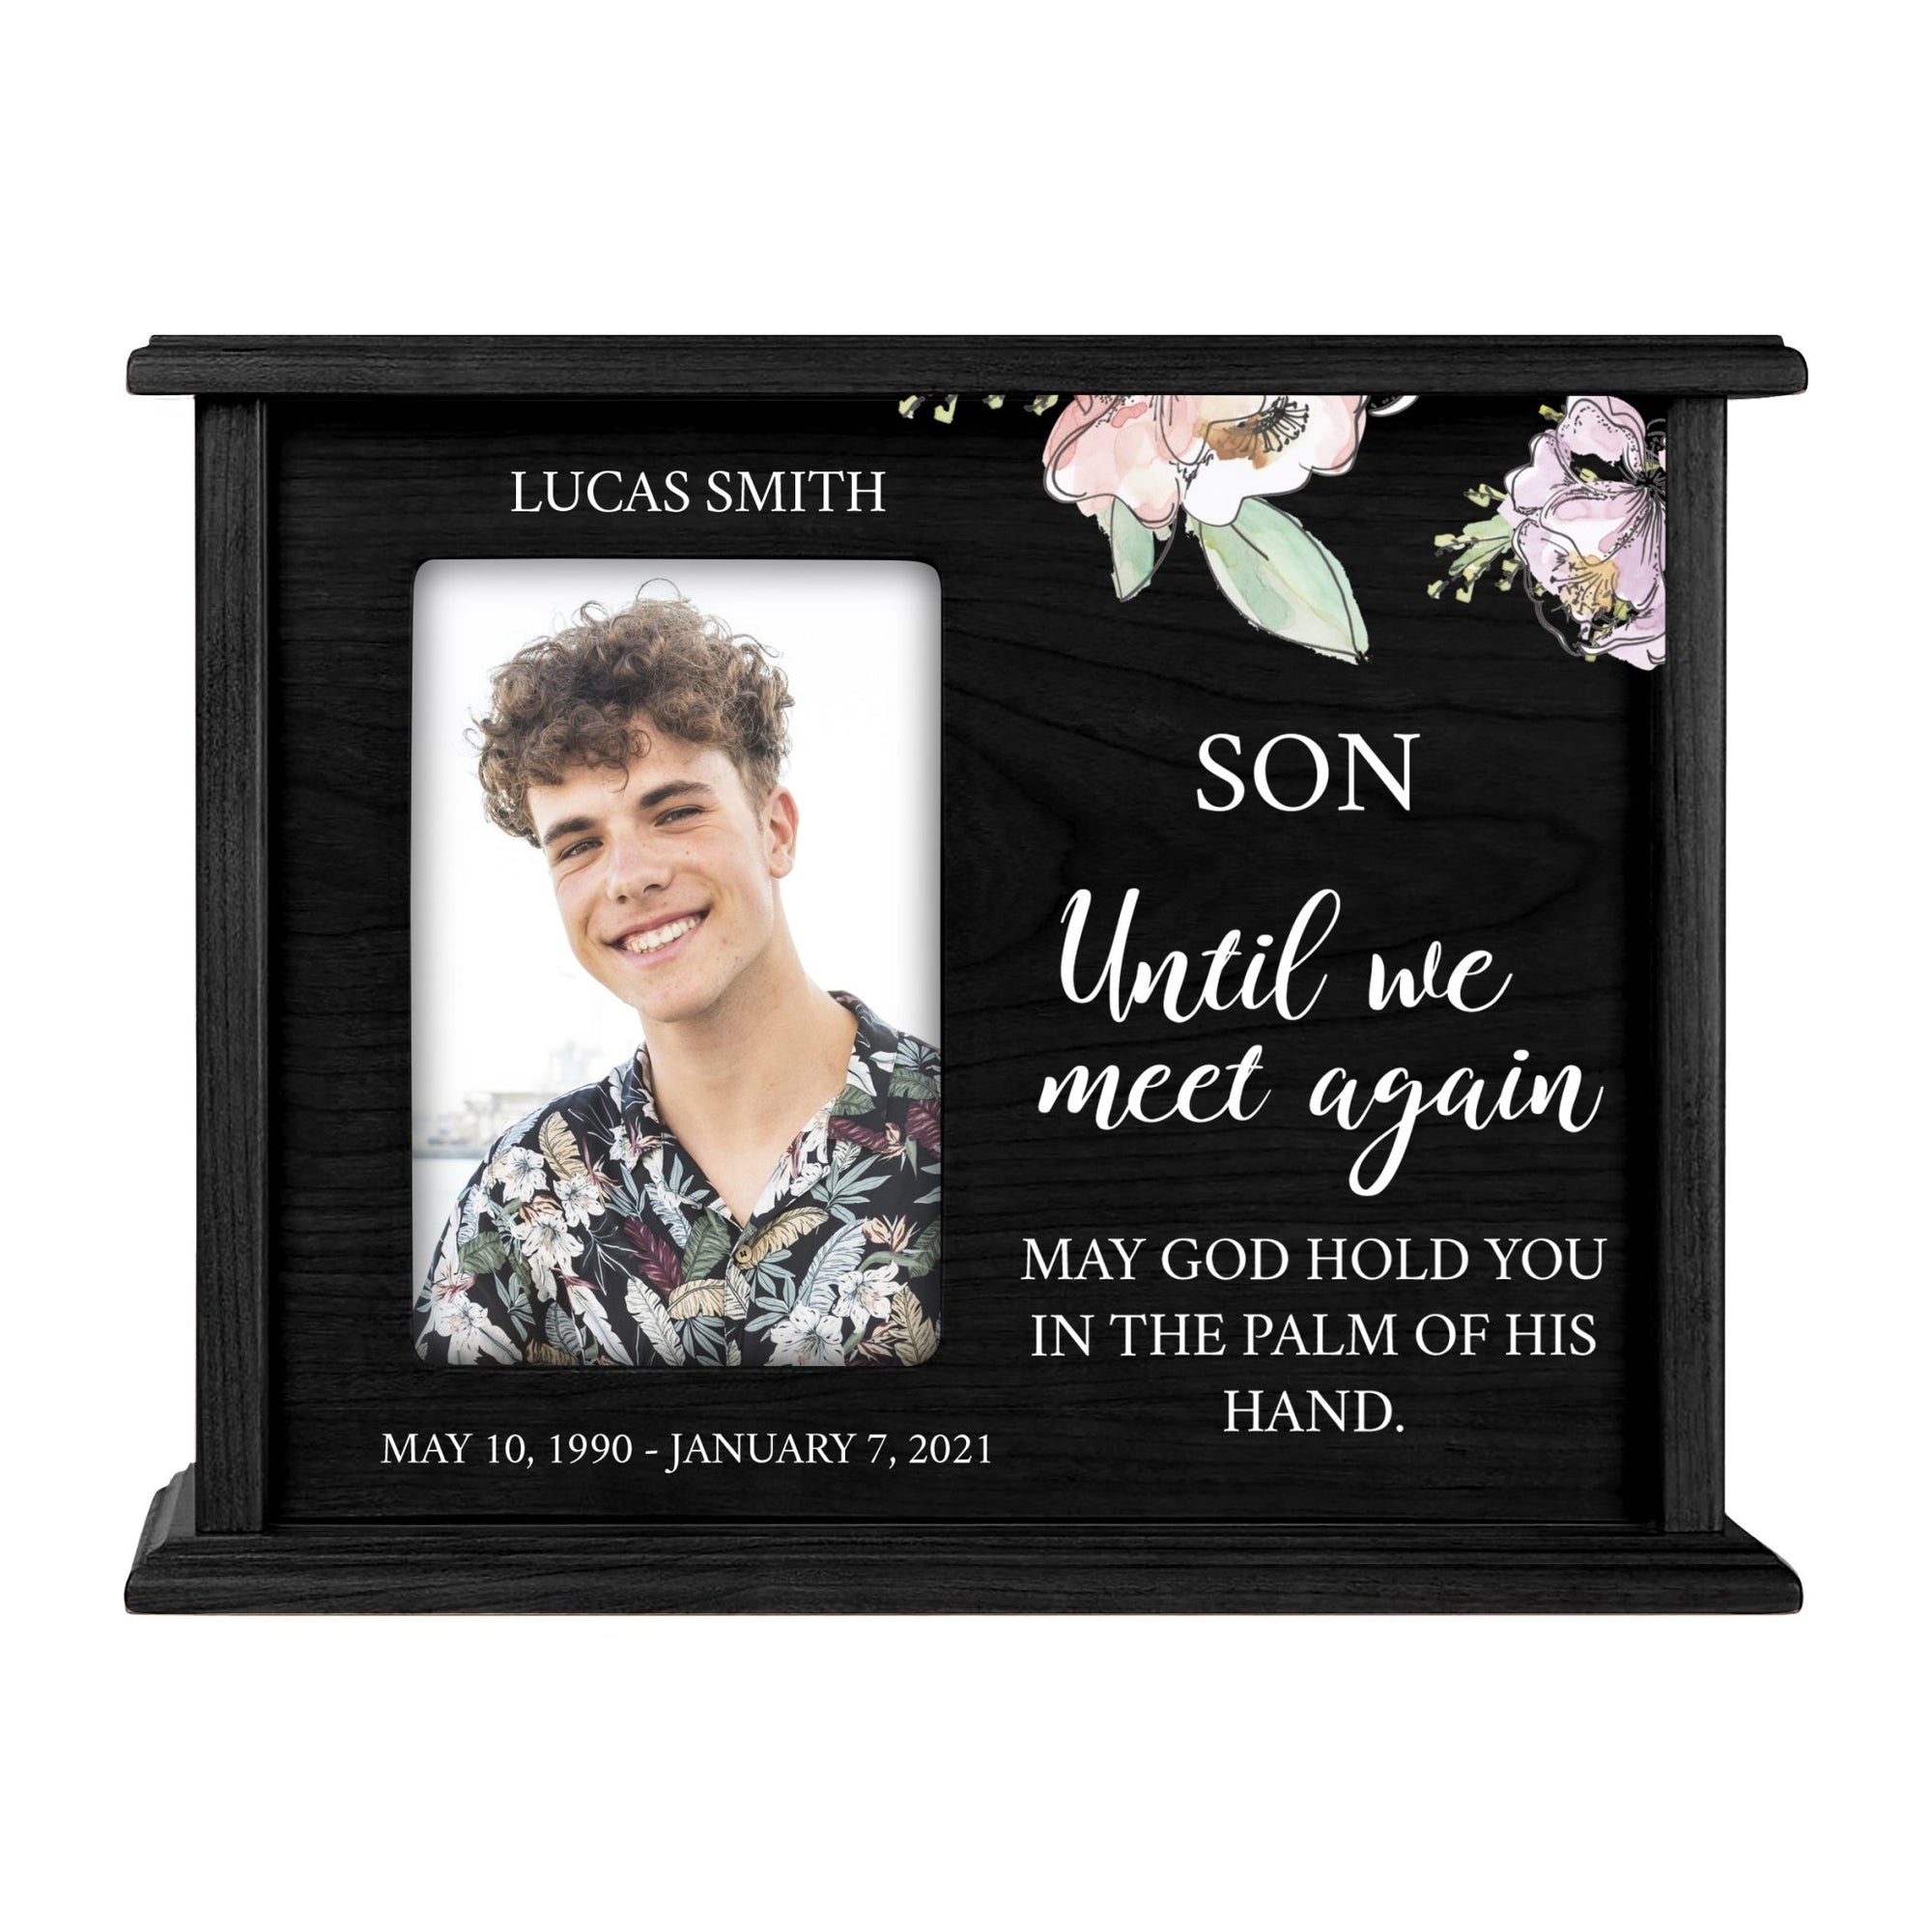 Personalized Memorial Cherry Wood 12 x 4.5 x 9 Cremation Urn Box with Picture Frame holds 200 cu in of Human Ashes and 4x6 Photo - Until We Meet Again (Black) - LifeSong Milestones